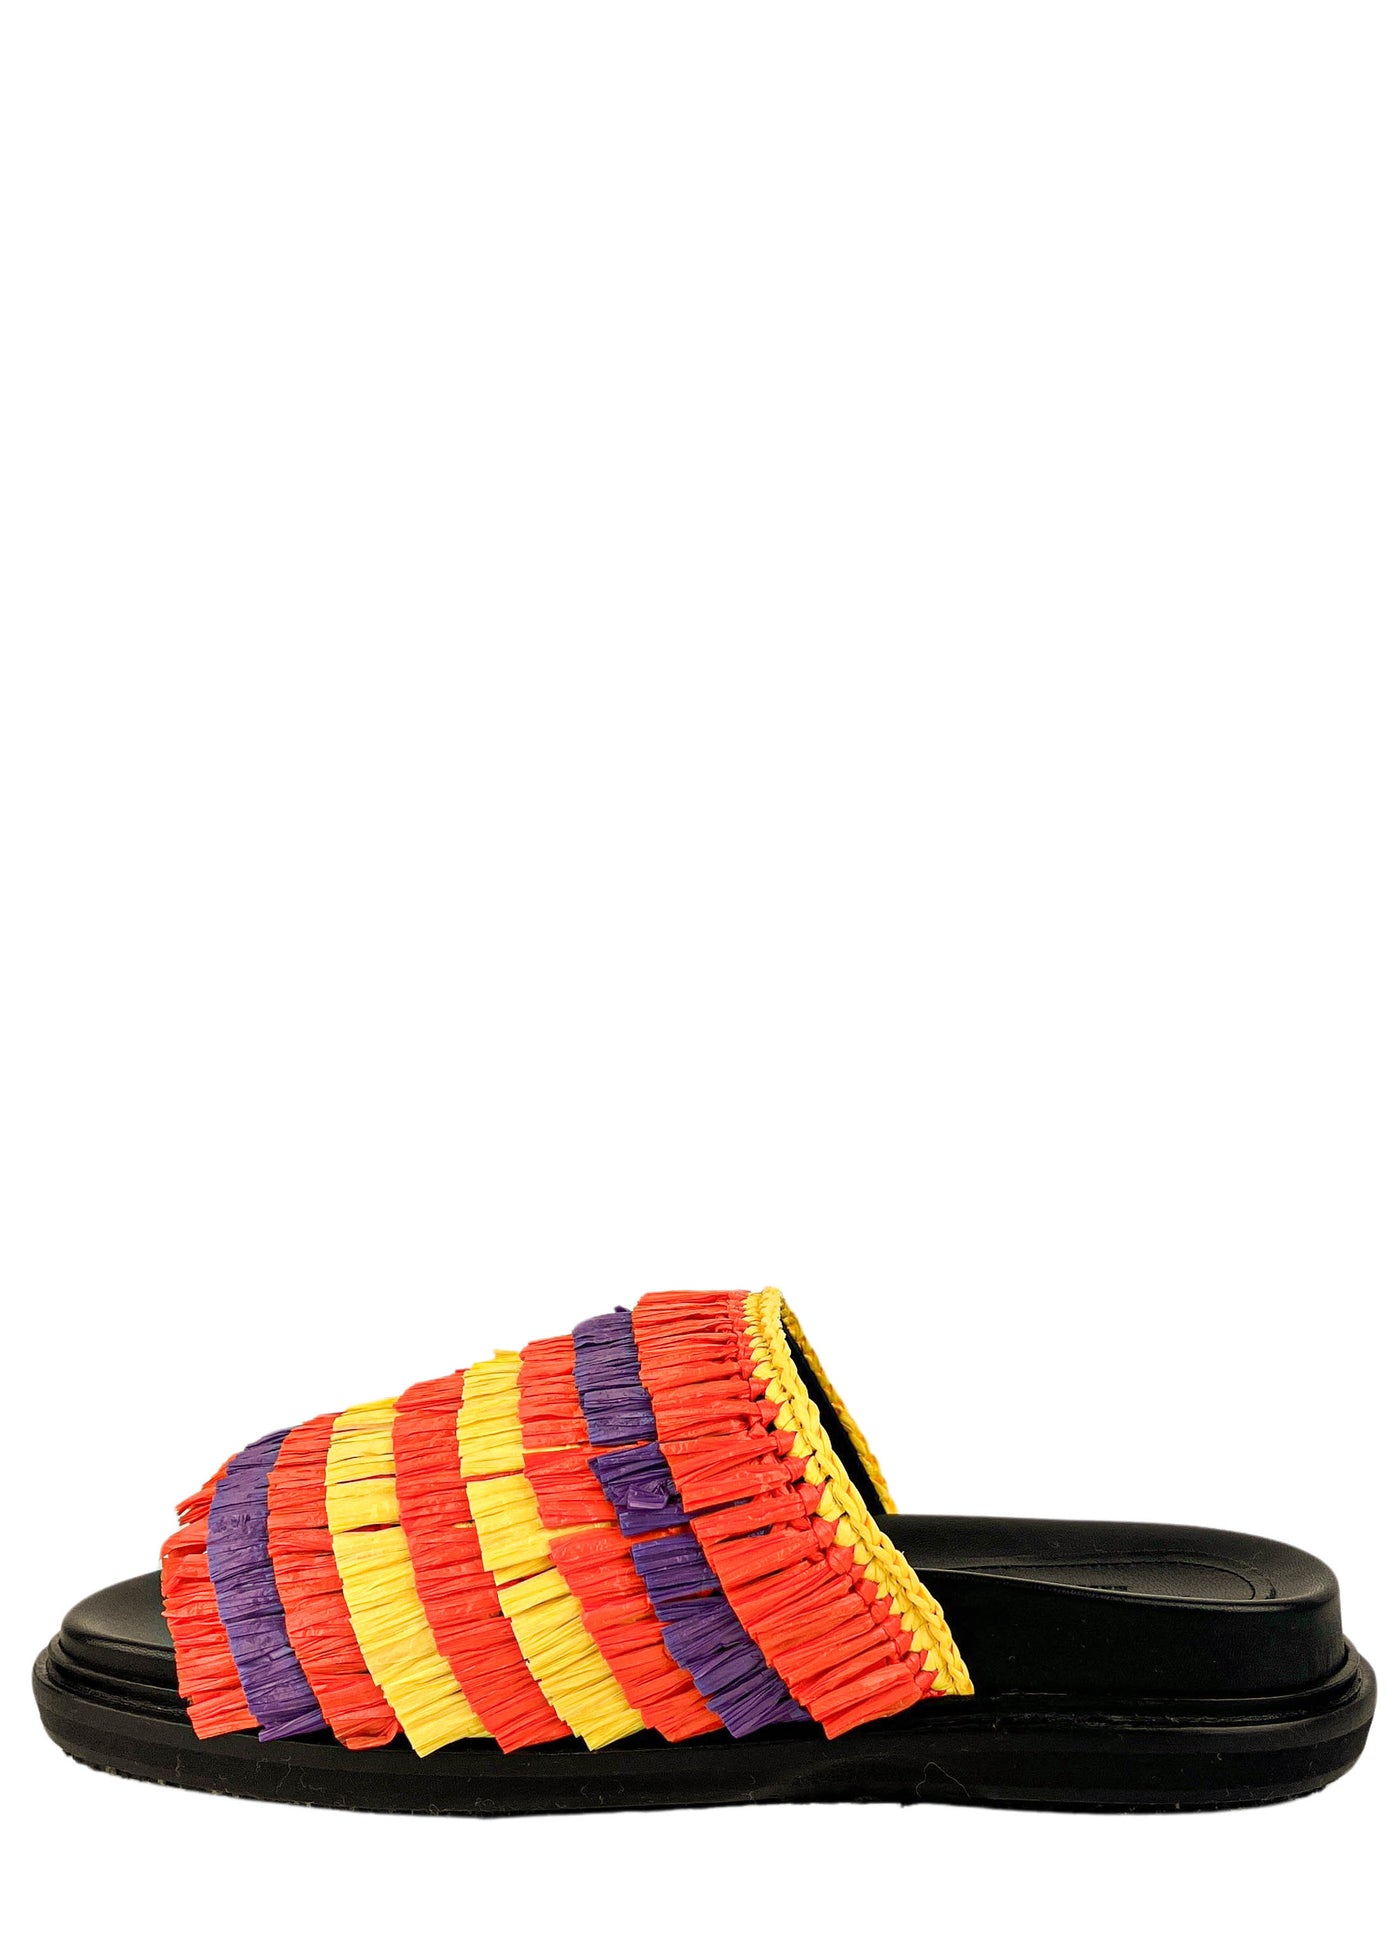 Marni Fussbett Sandals in Carrot, Yellow and Violet - Discounts on Marni at UAL